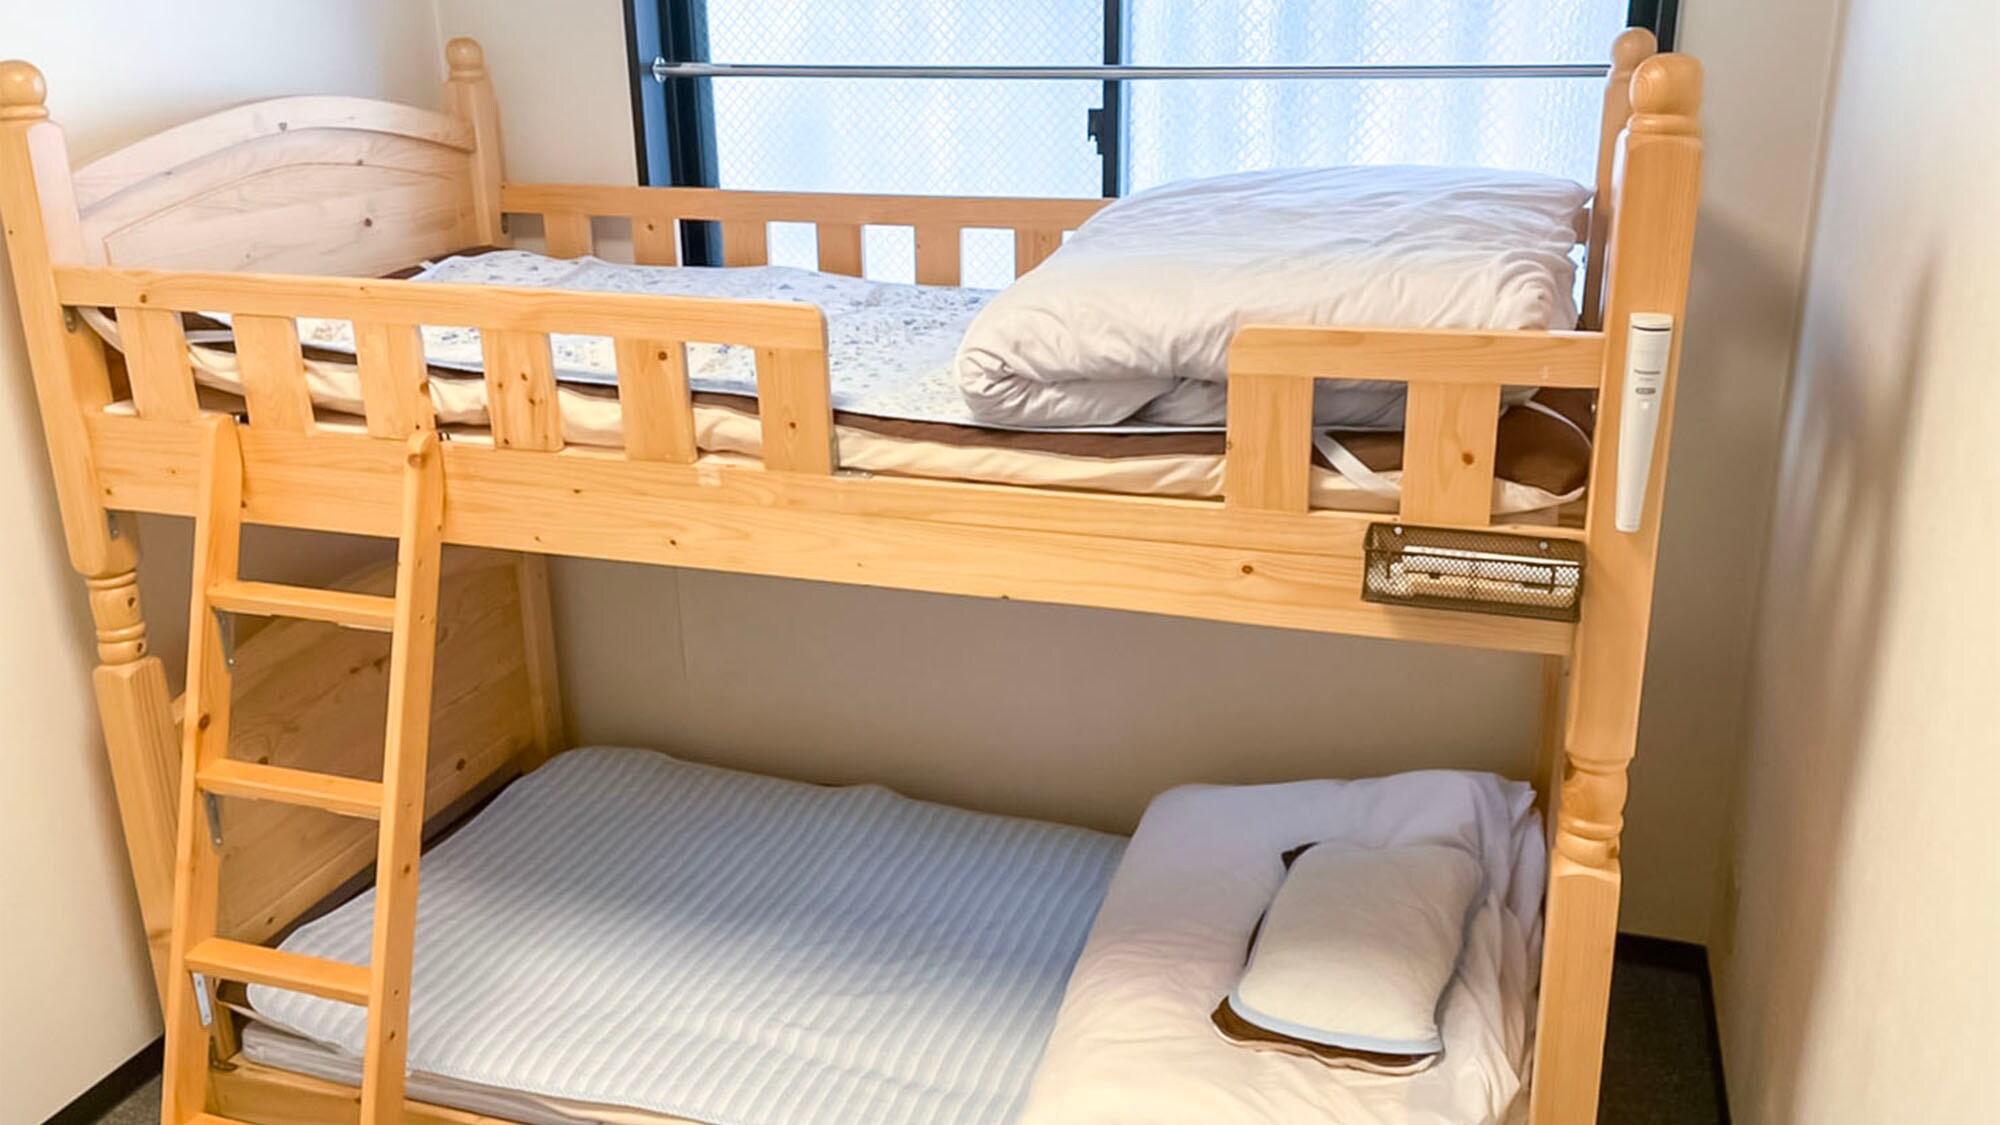 ・ Double room / 1 bunk bed installed